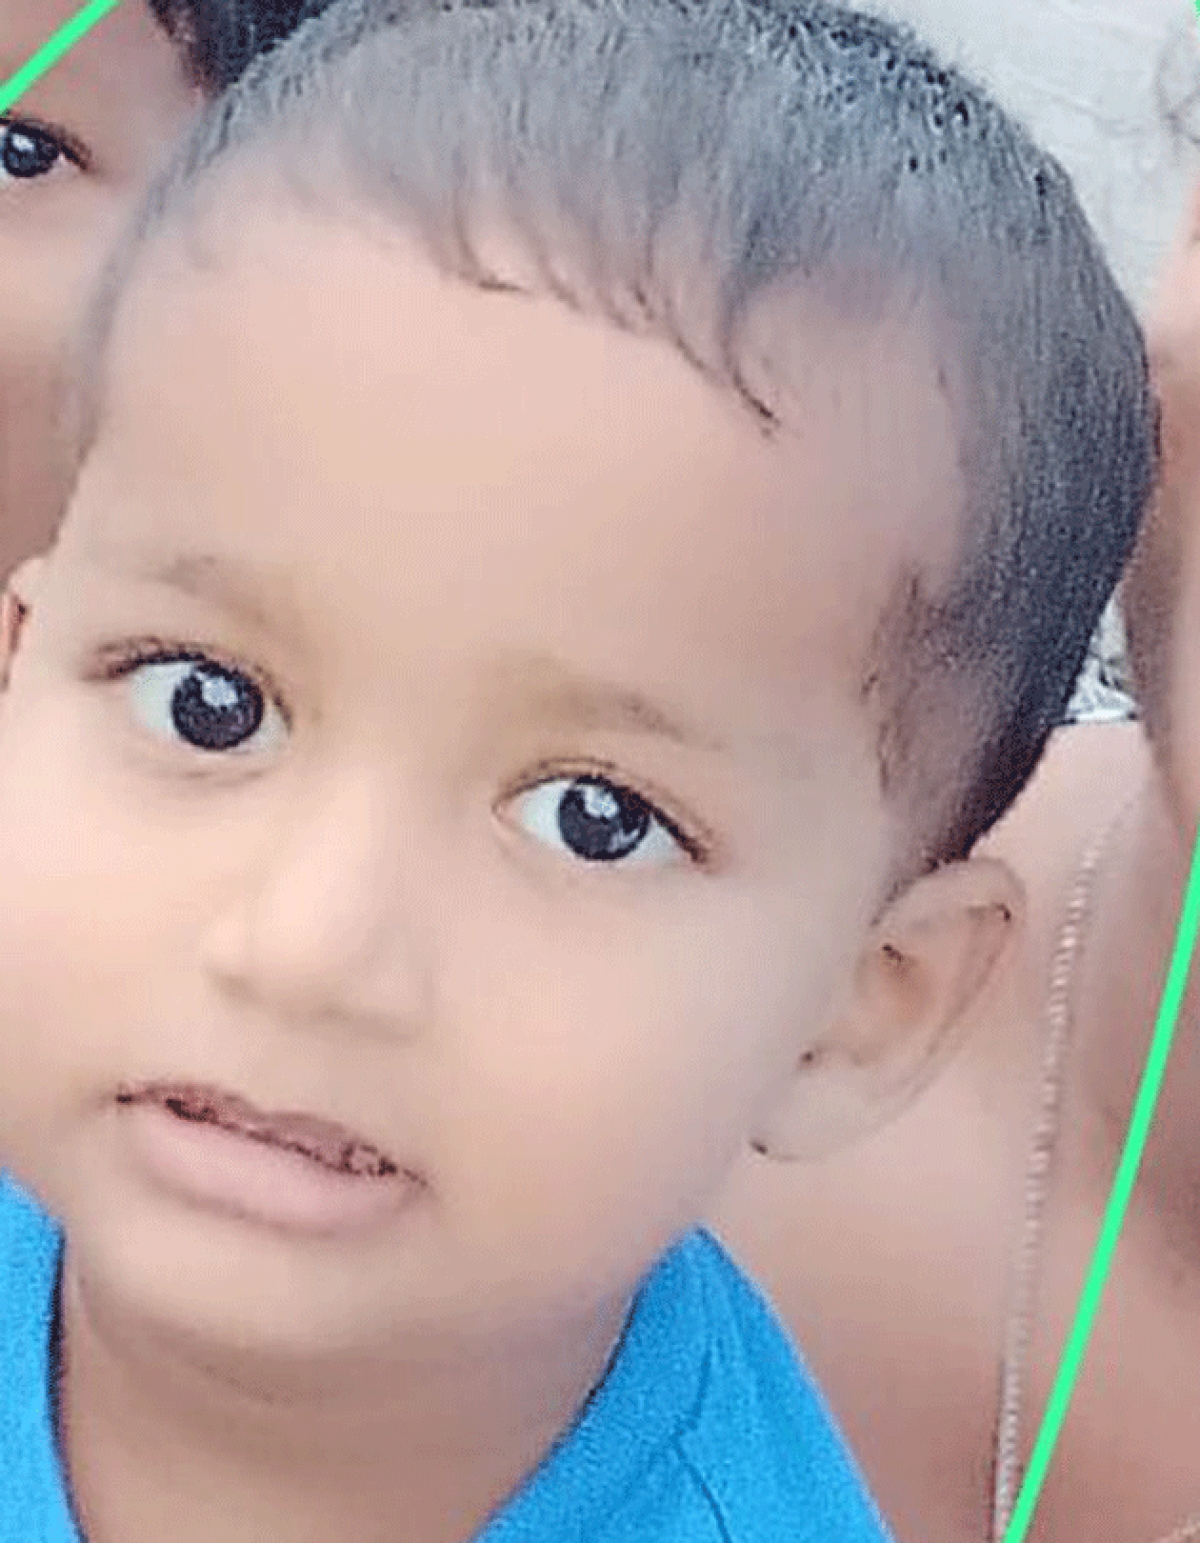 New Year Tragedy: Missing 2-Year-Old Found Dead in Neluwa Canal After Special Operation by Police and Villagers